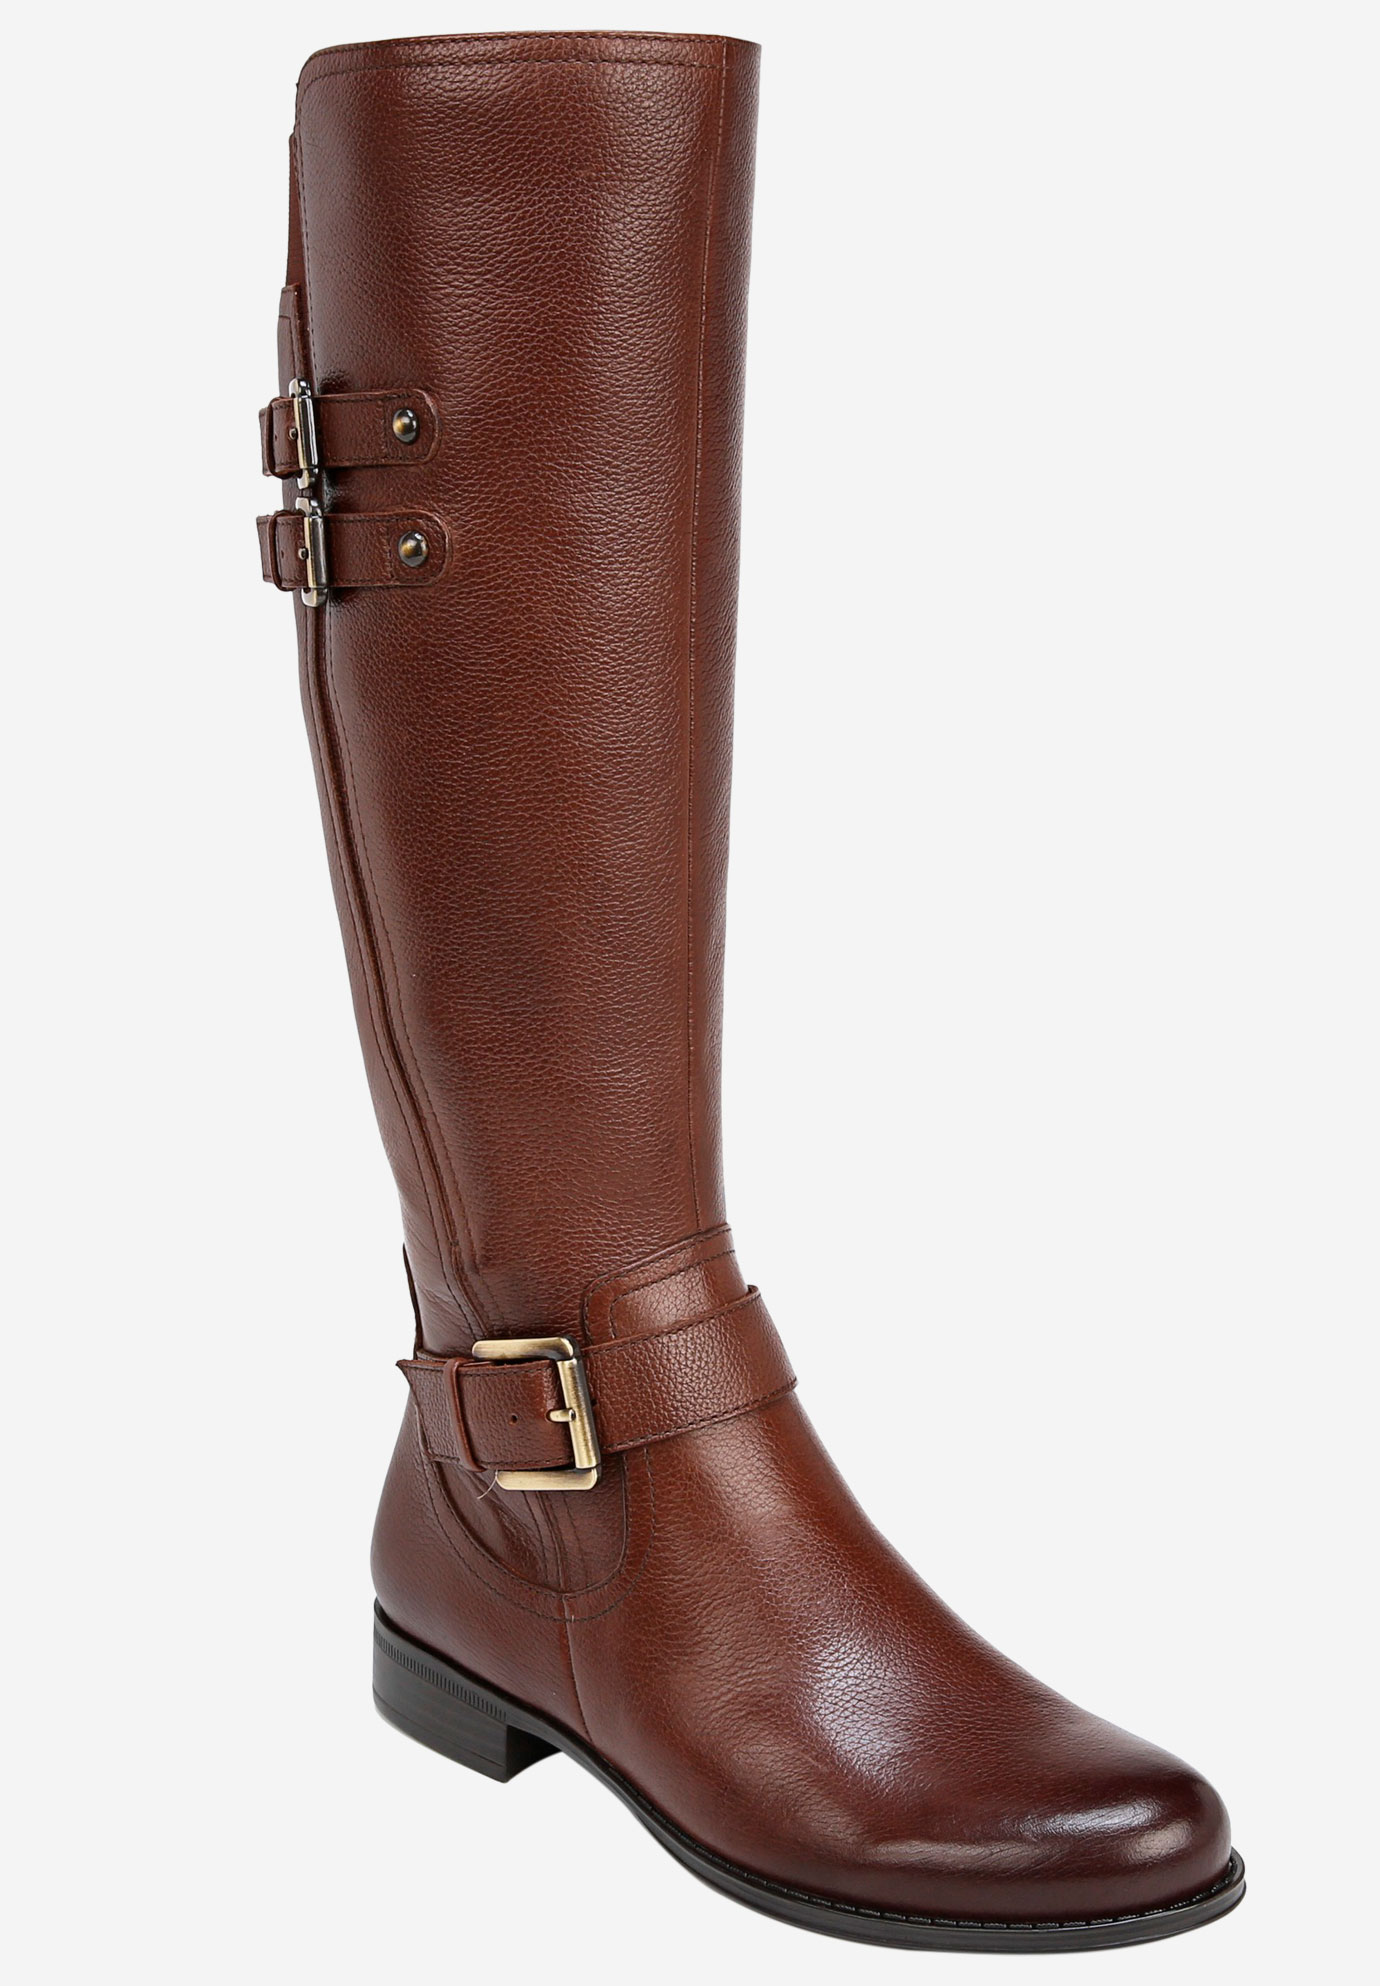 Jessie High Shaft Boot by Naturalizer®| Plus Size Regular Calf Boots ...